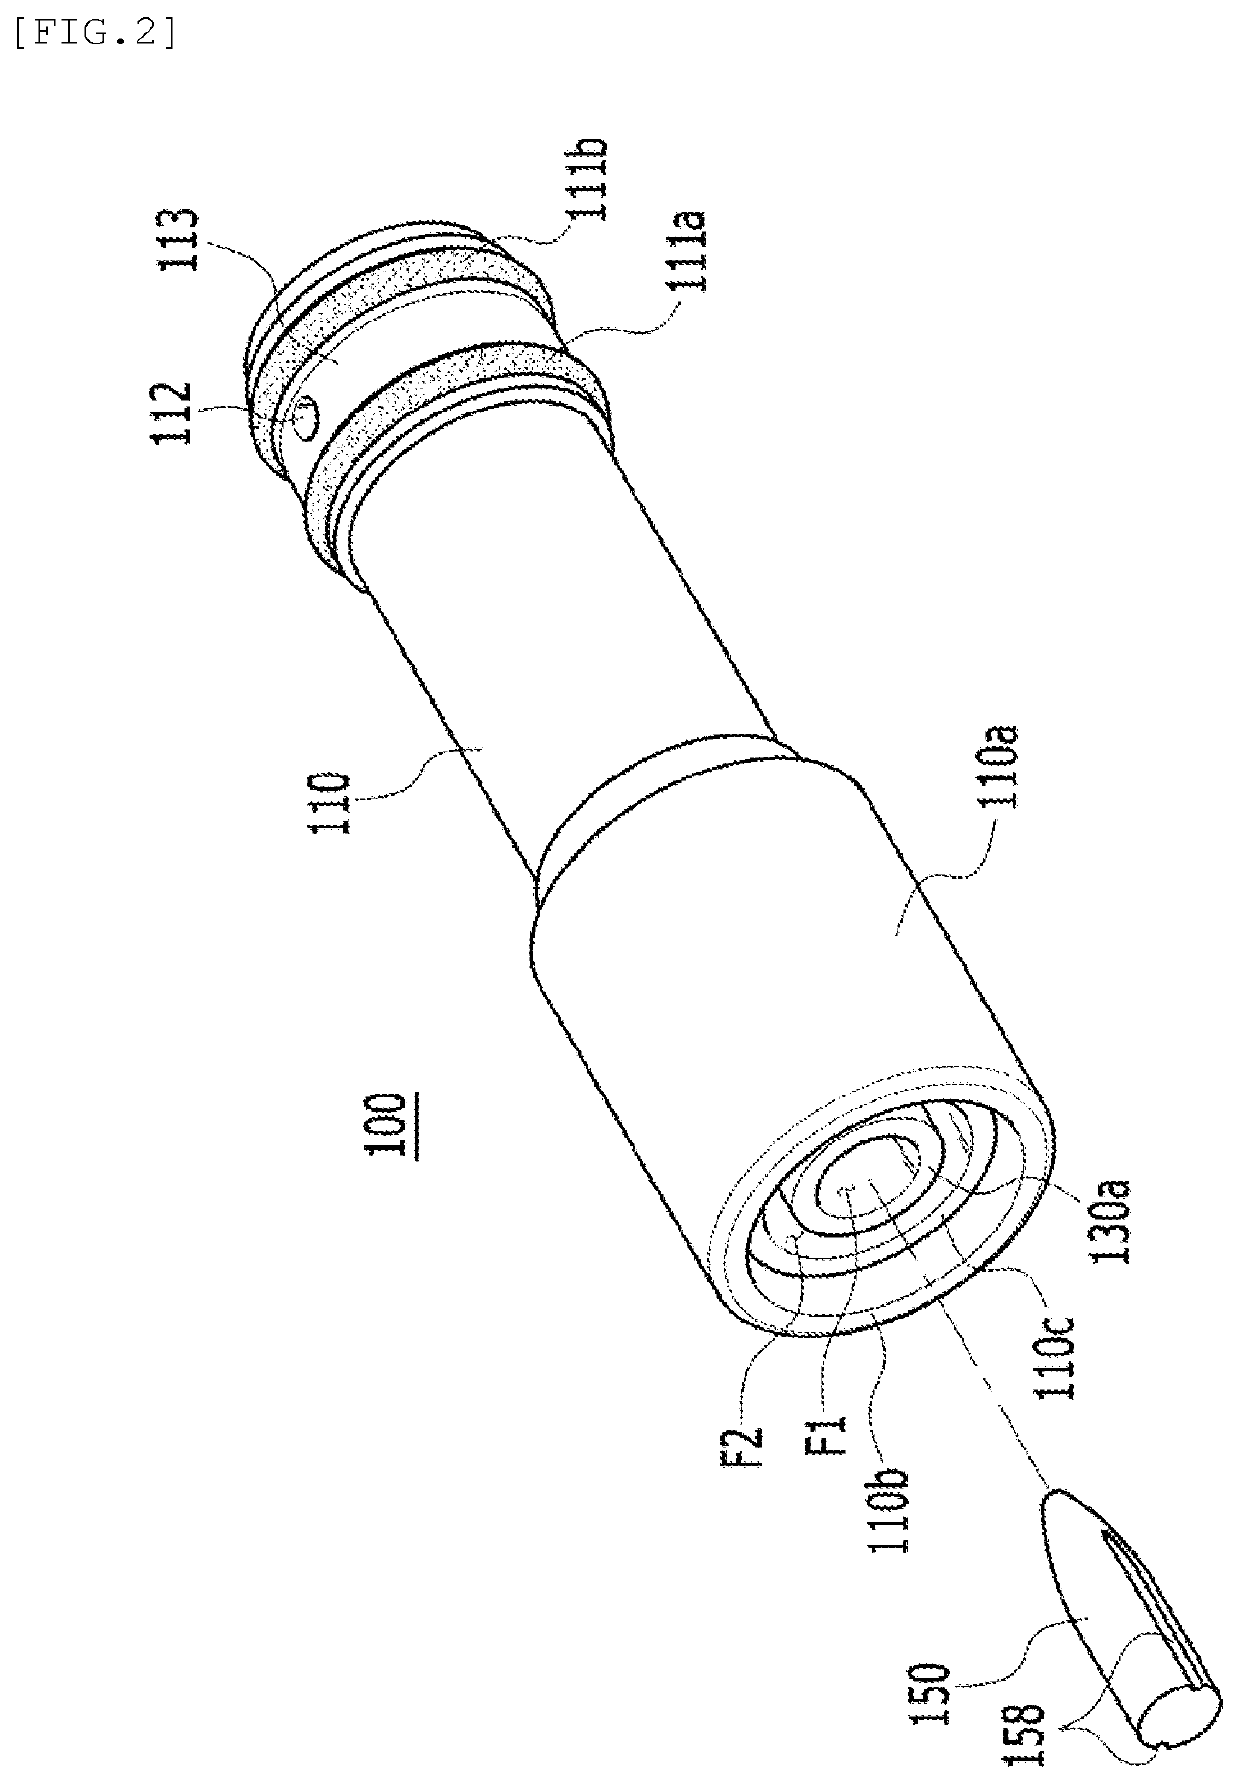 Handpiece of skin care device